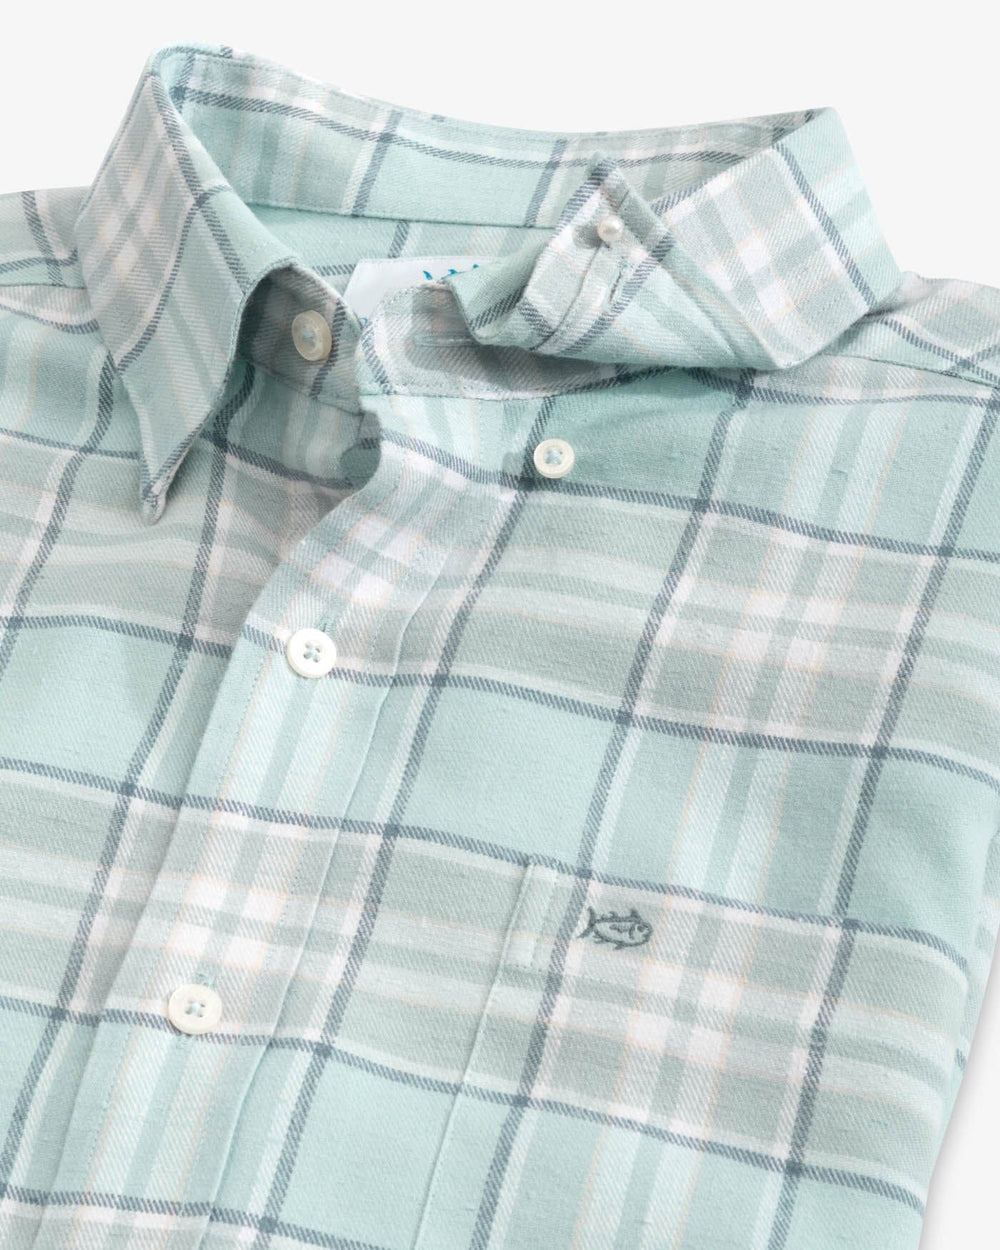 The detail view of the Southern Tide Beach Flannel Heather Reddick Plaid Sport Shirt by Southern Tide - Heather Summer Aqua